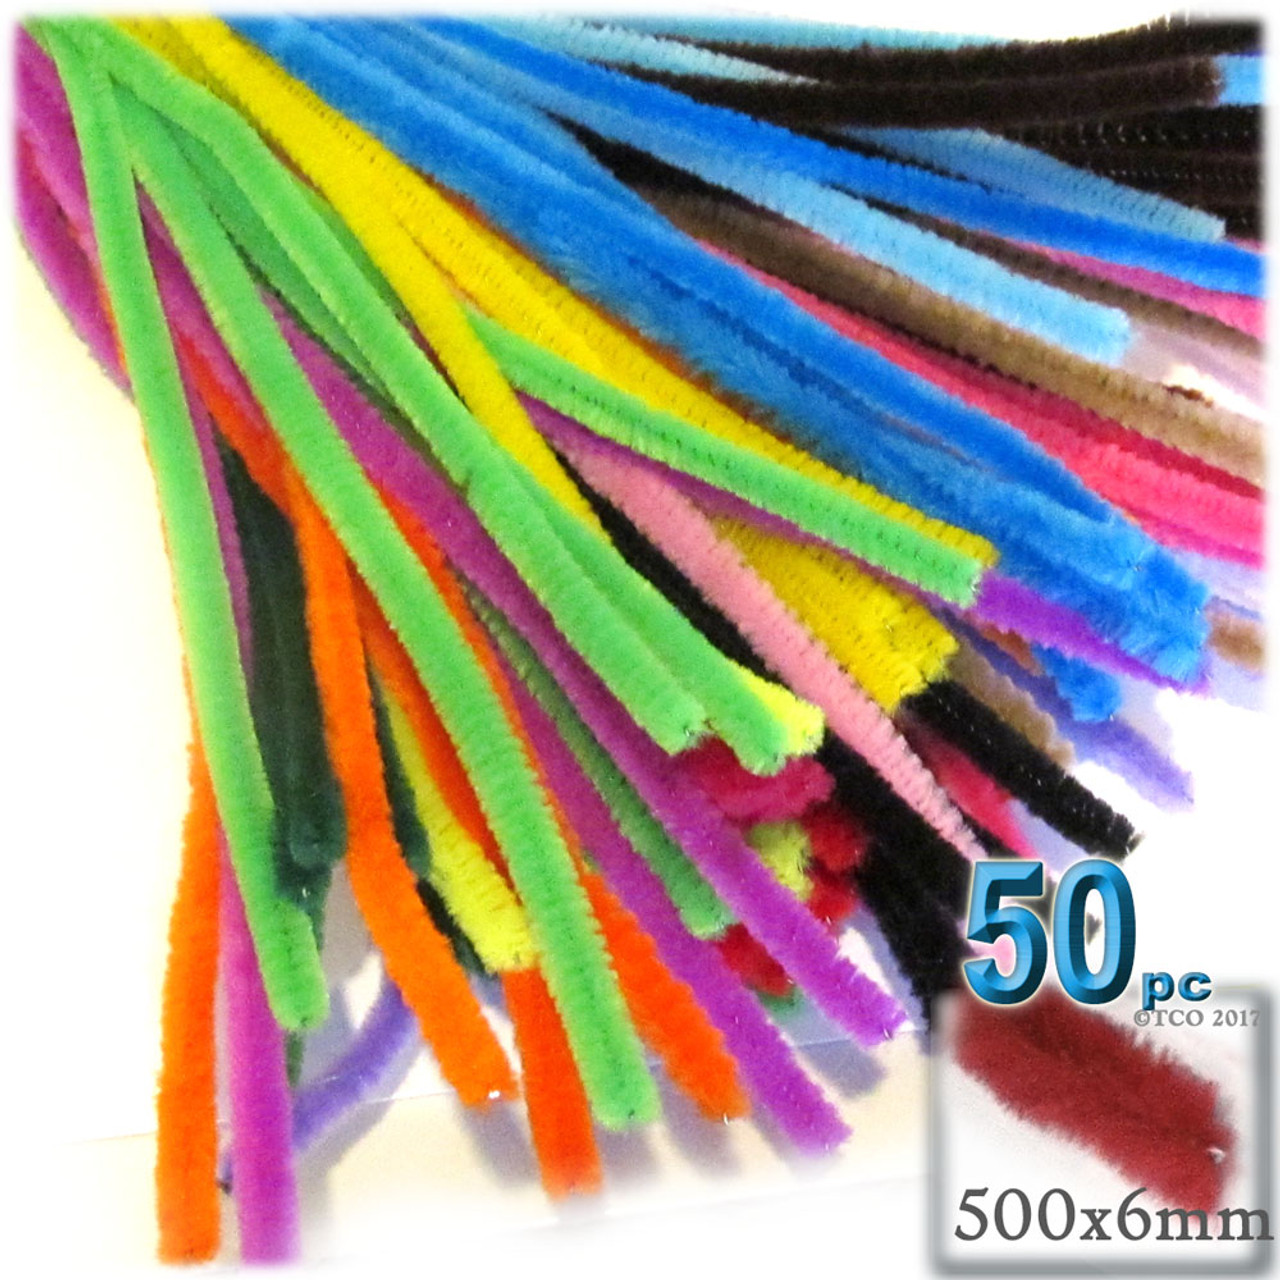 Pipe Cleaner (Chenille Stems) – King Stationary Inc